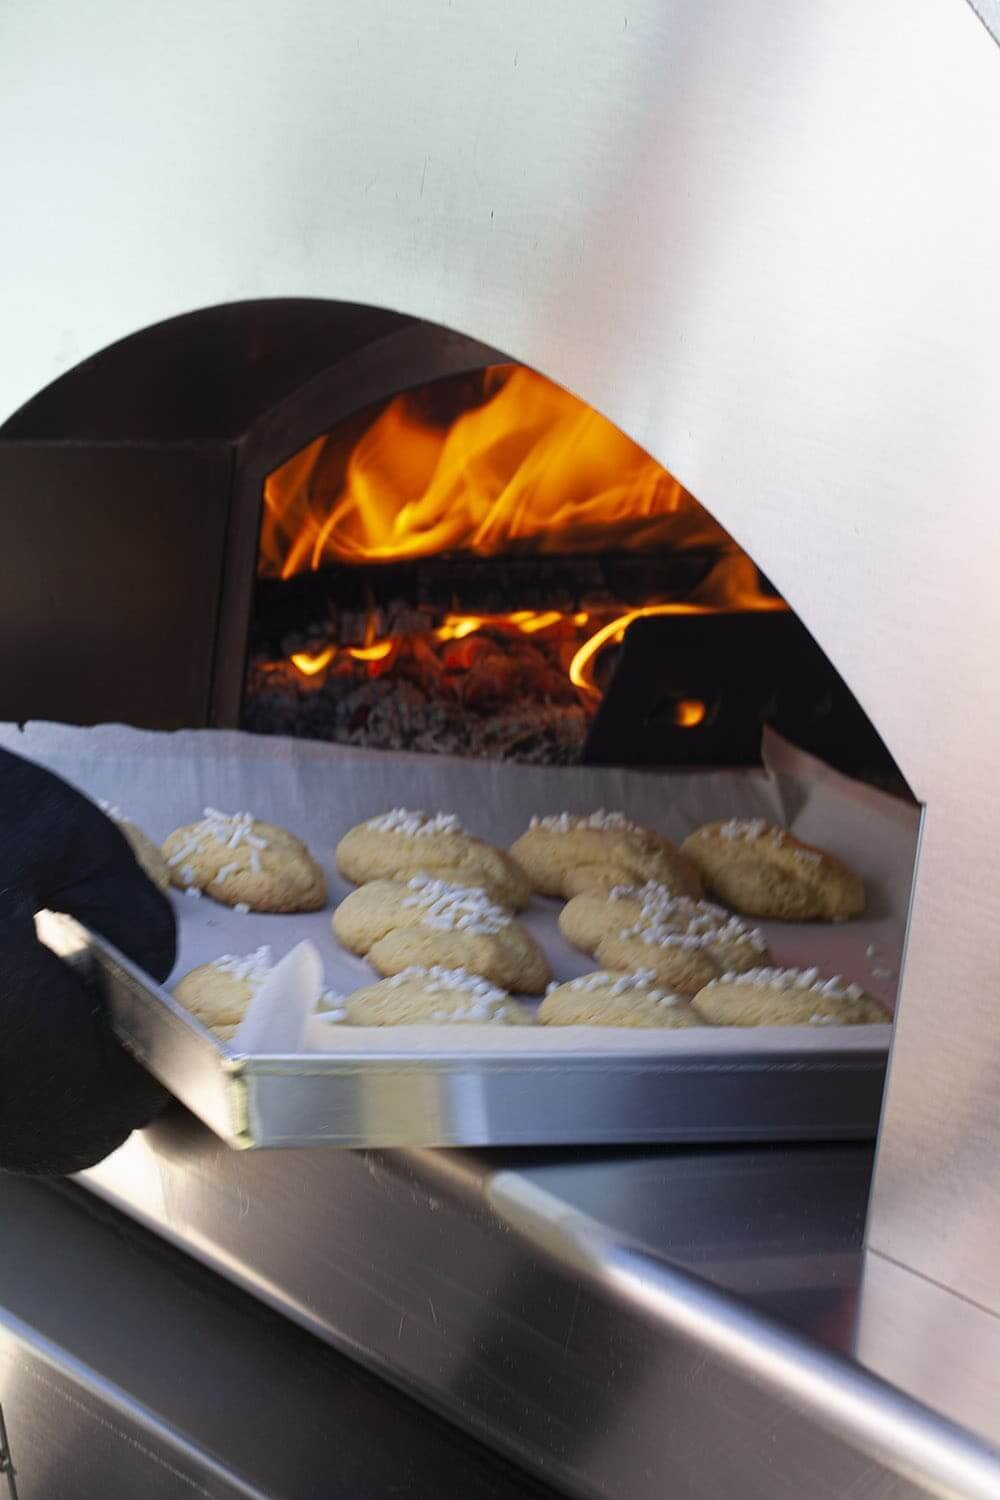 Dome oven Fontana Margherita with wood firing, pizza oven for outdoor kitchen, anthracite